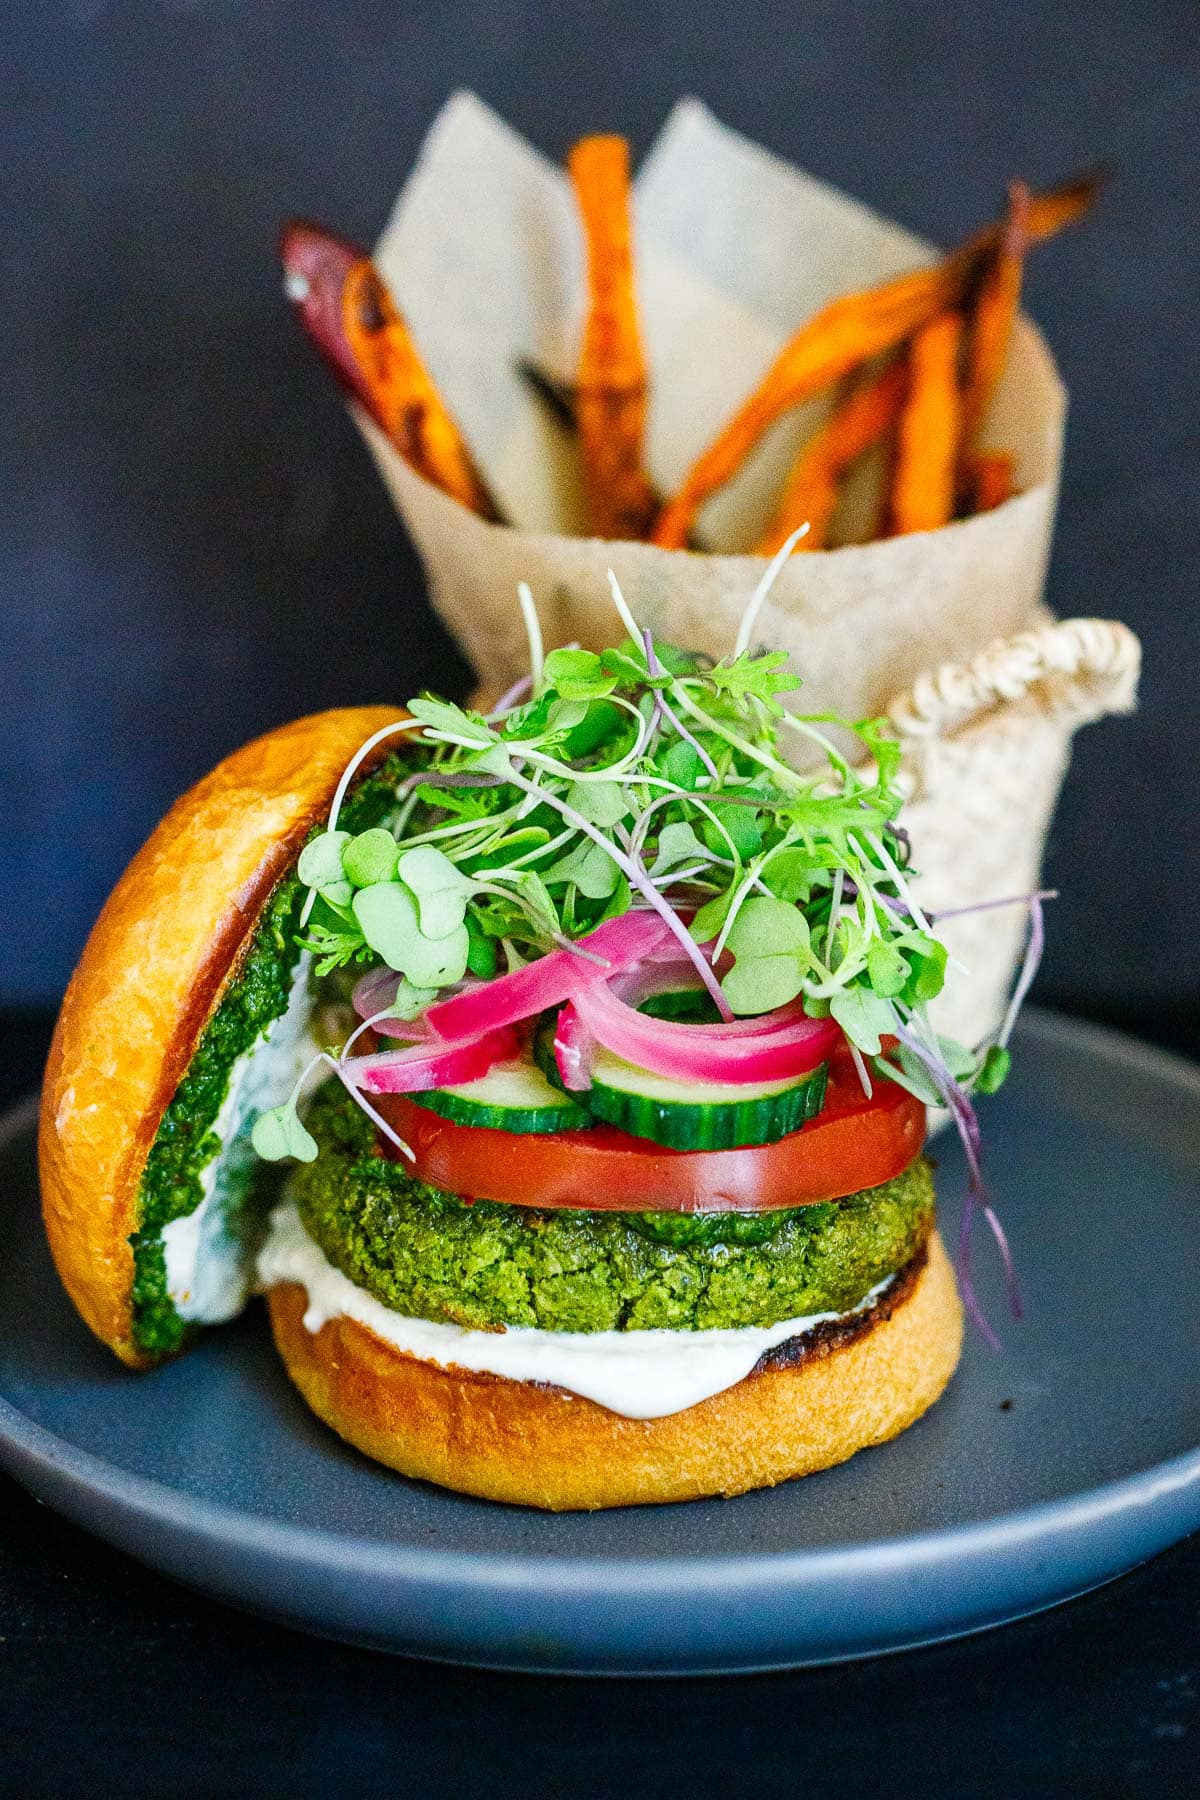 This falafel burger is a punchy, flavorful, high-protein vegetarian dinner! Top with tahini yogurt, pickled onions, sliced cucumbers, and tomatoes on a toasty brioche bun.